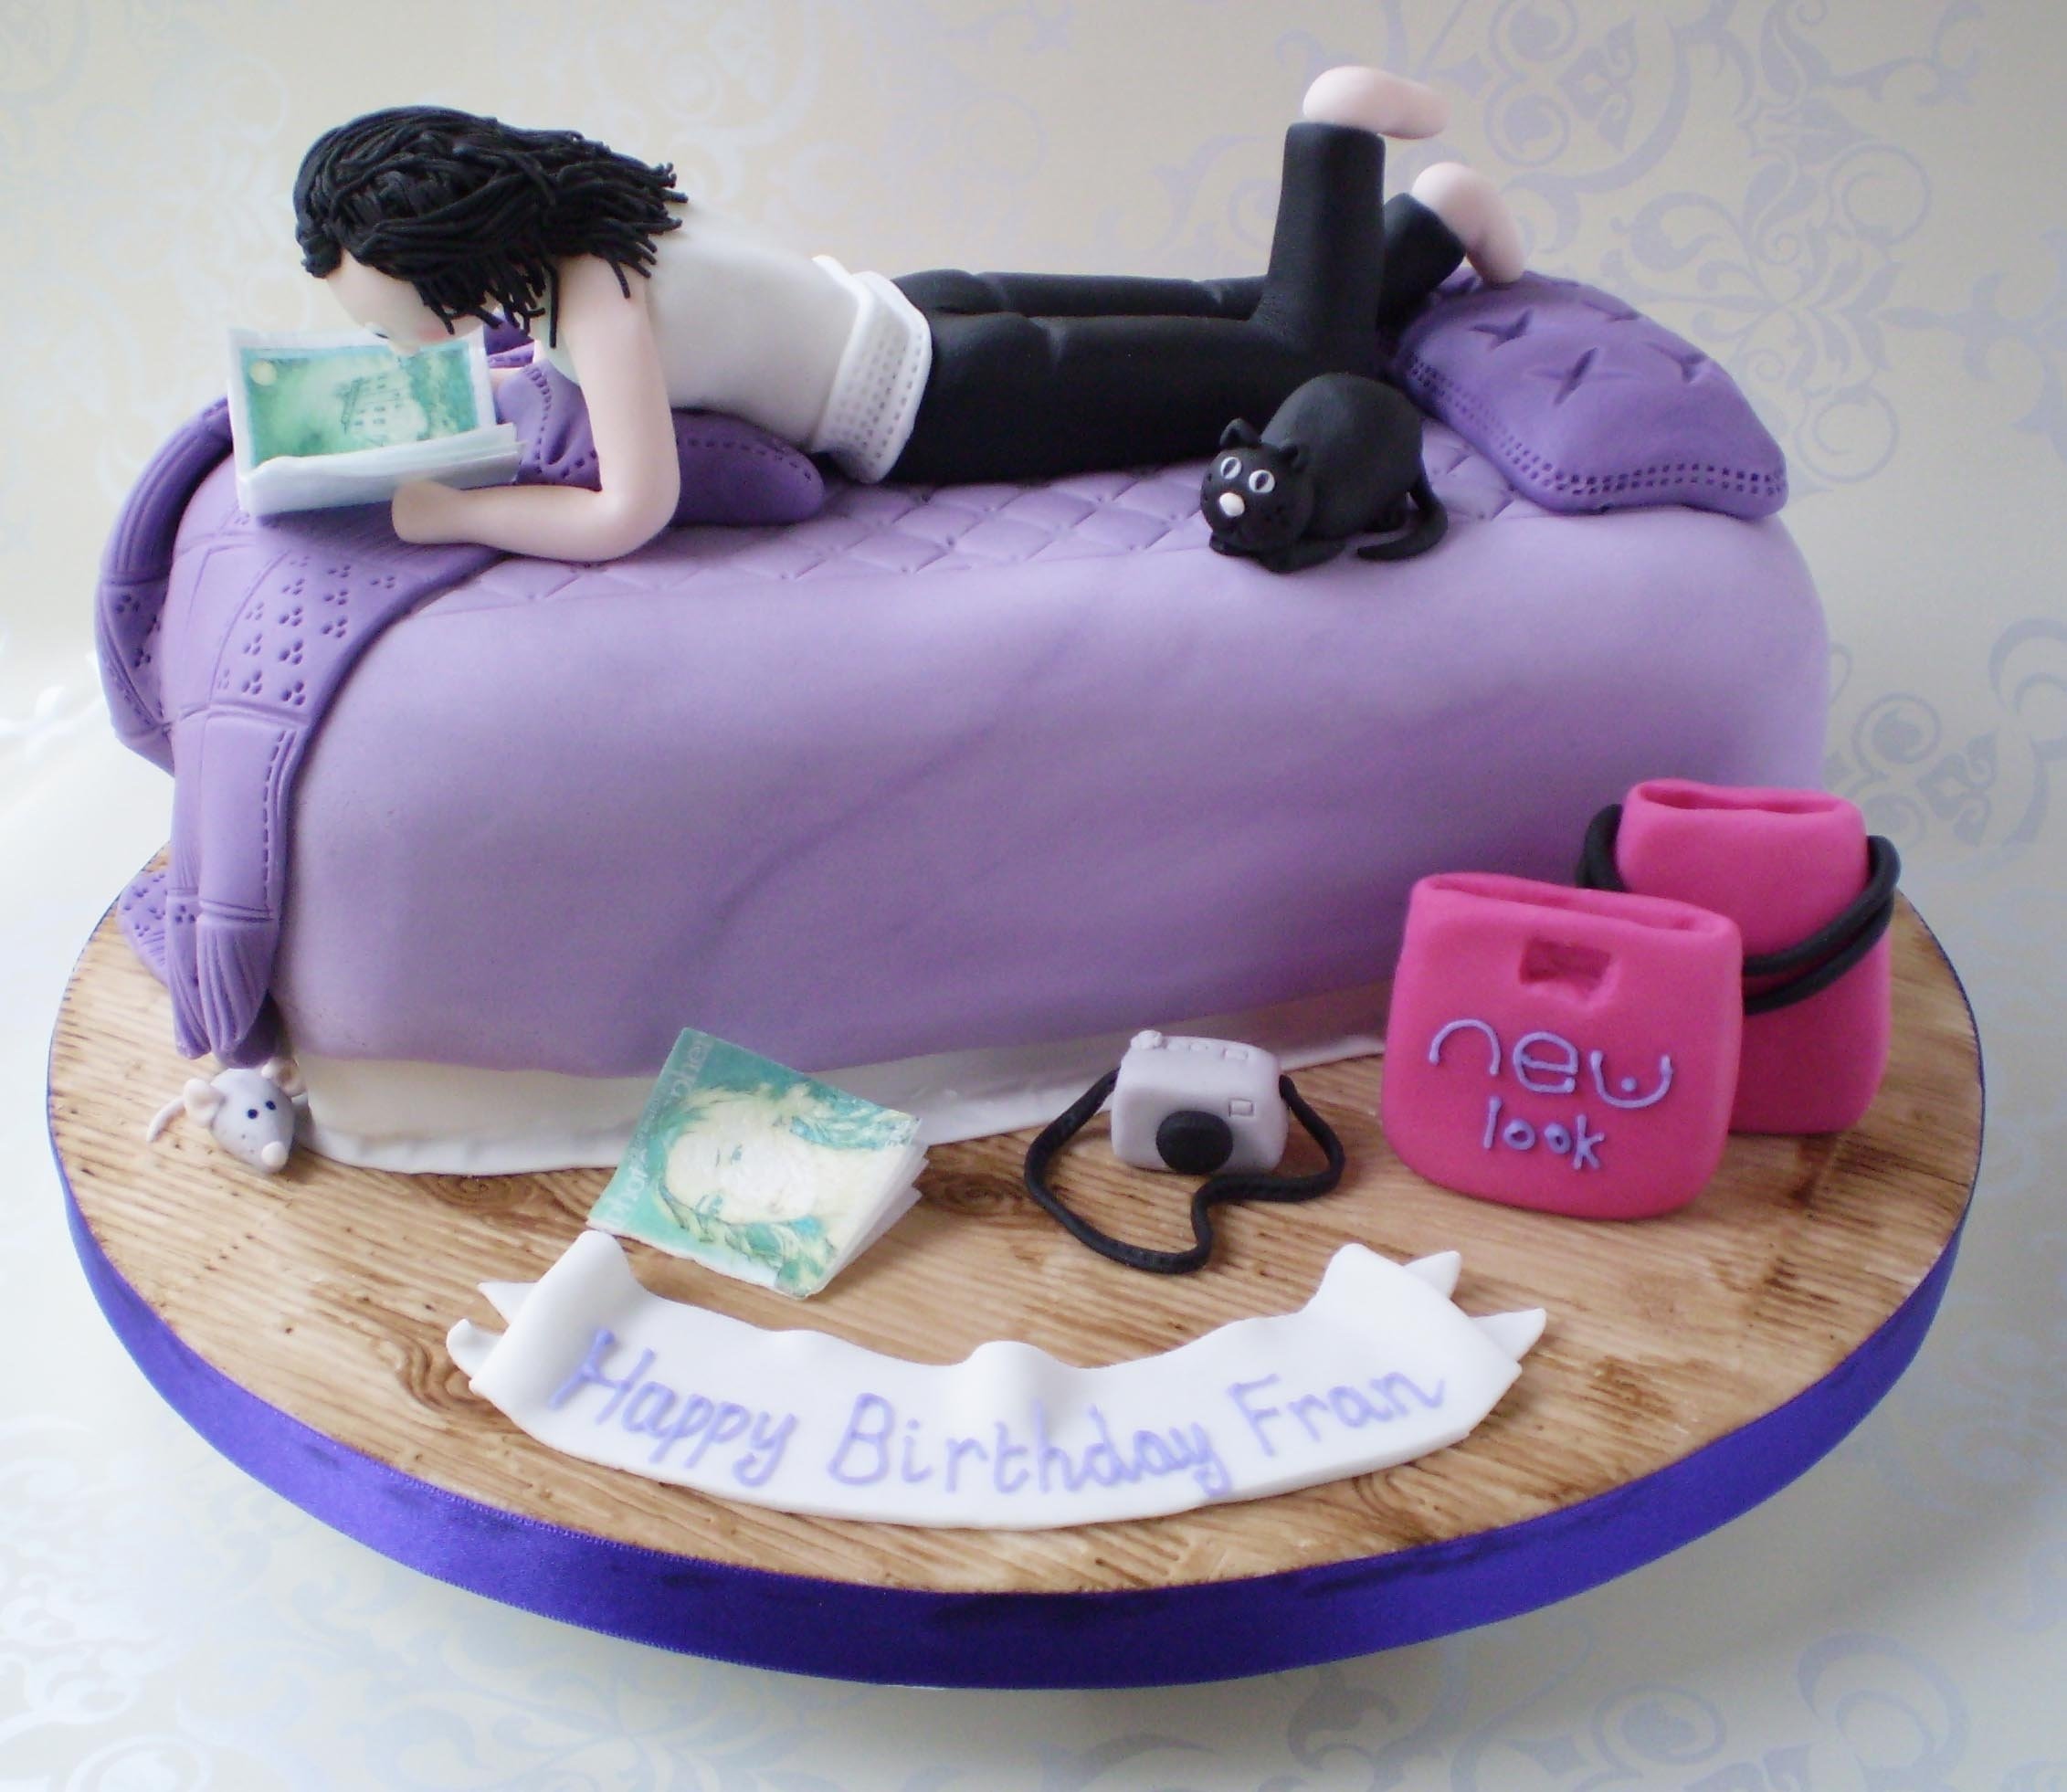 10 Great Cake Ideas For Teenage Girls thank you for visiting teenagers bedroom birthday cake food 1 2022